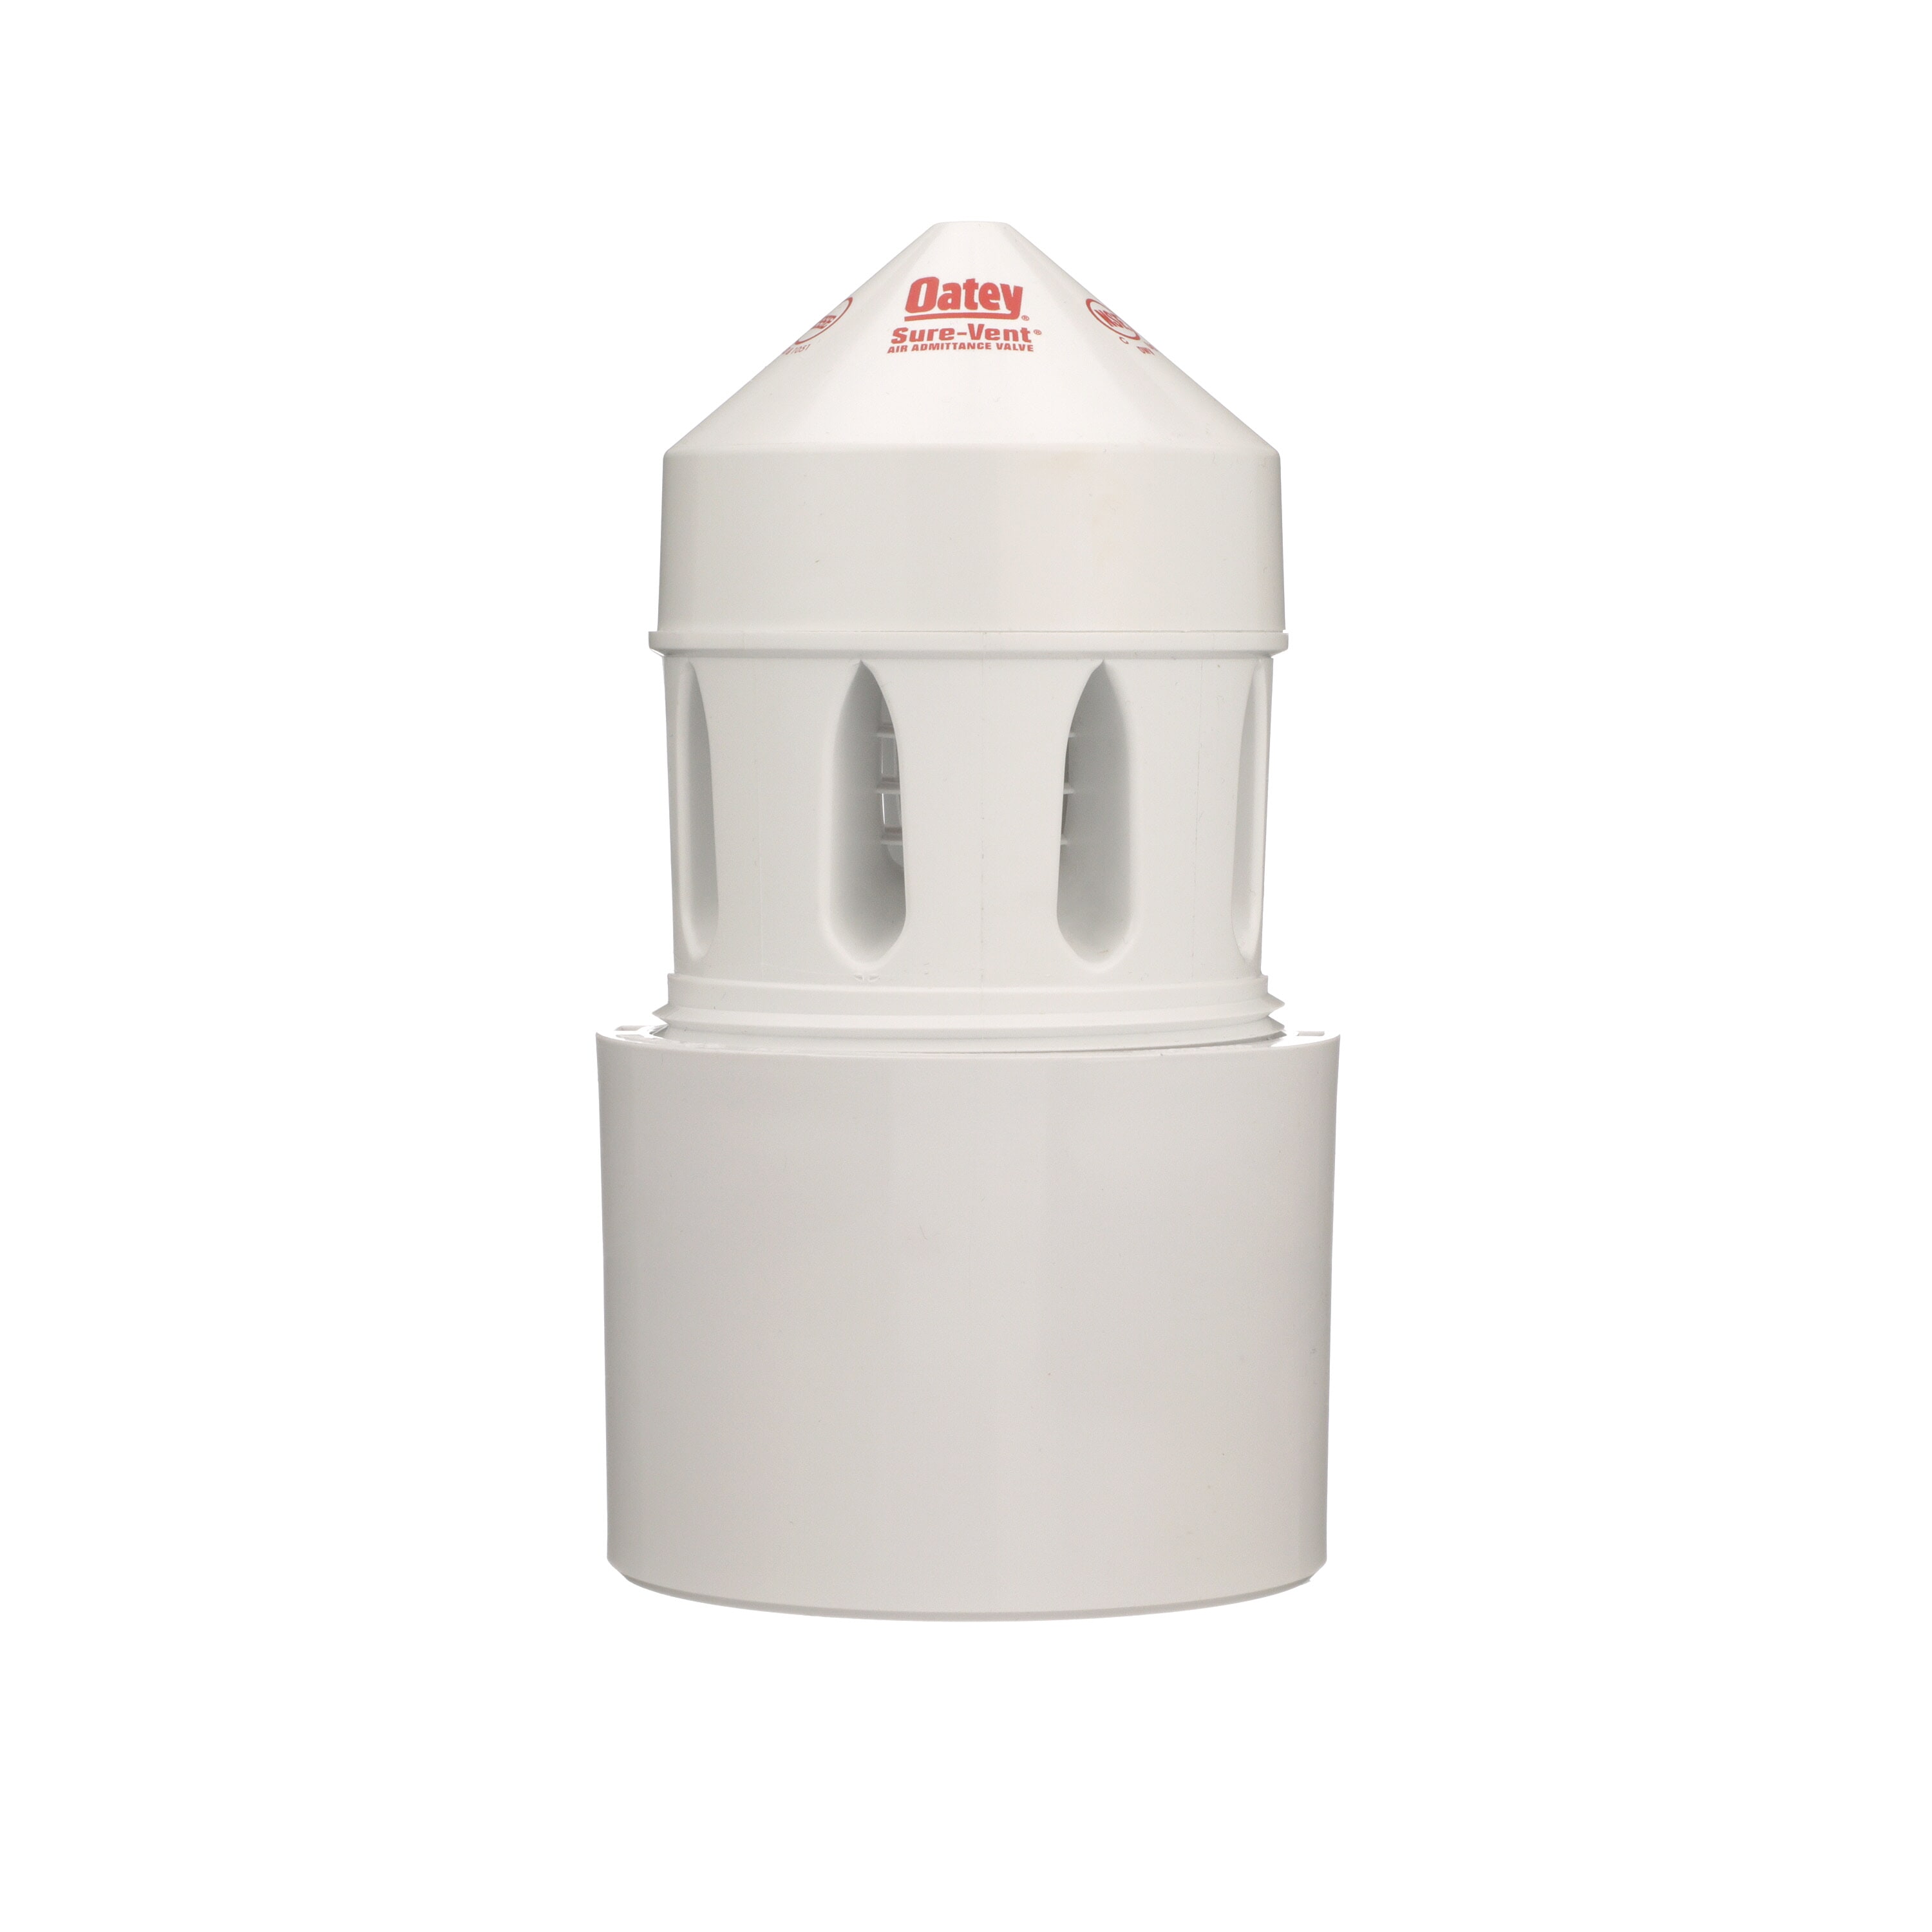 Oatey® Sure-Vent® 39223 Air Admittance Valve With 3 x 4 in SCH 40 PVC Adapter, 3 x 4 in Nominal, NPT End Style, 500 DFU Flow Rate, PVC Body